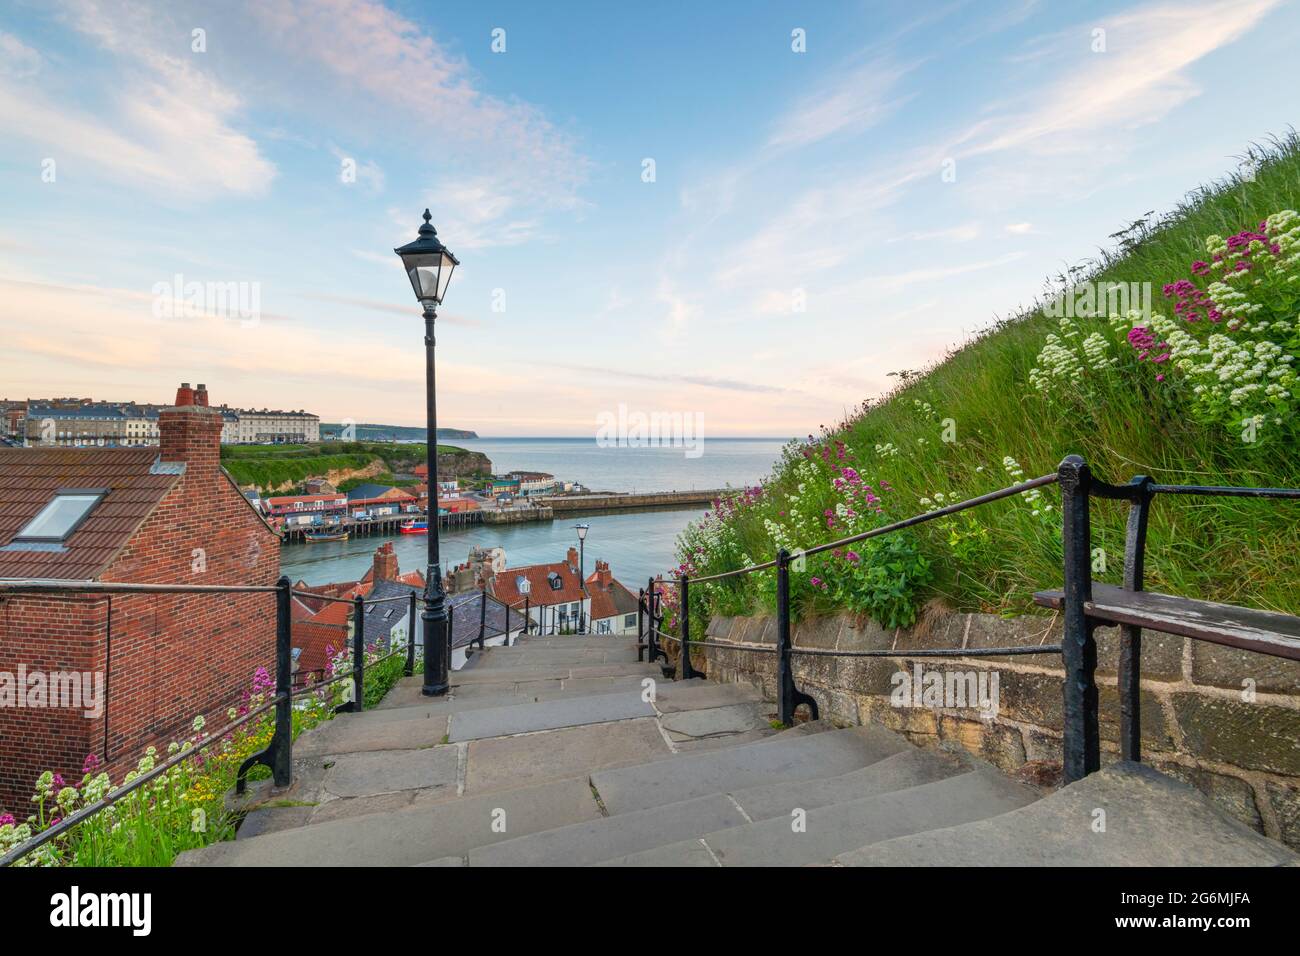 199 Steps at Whitby after sunrise Stock Photo